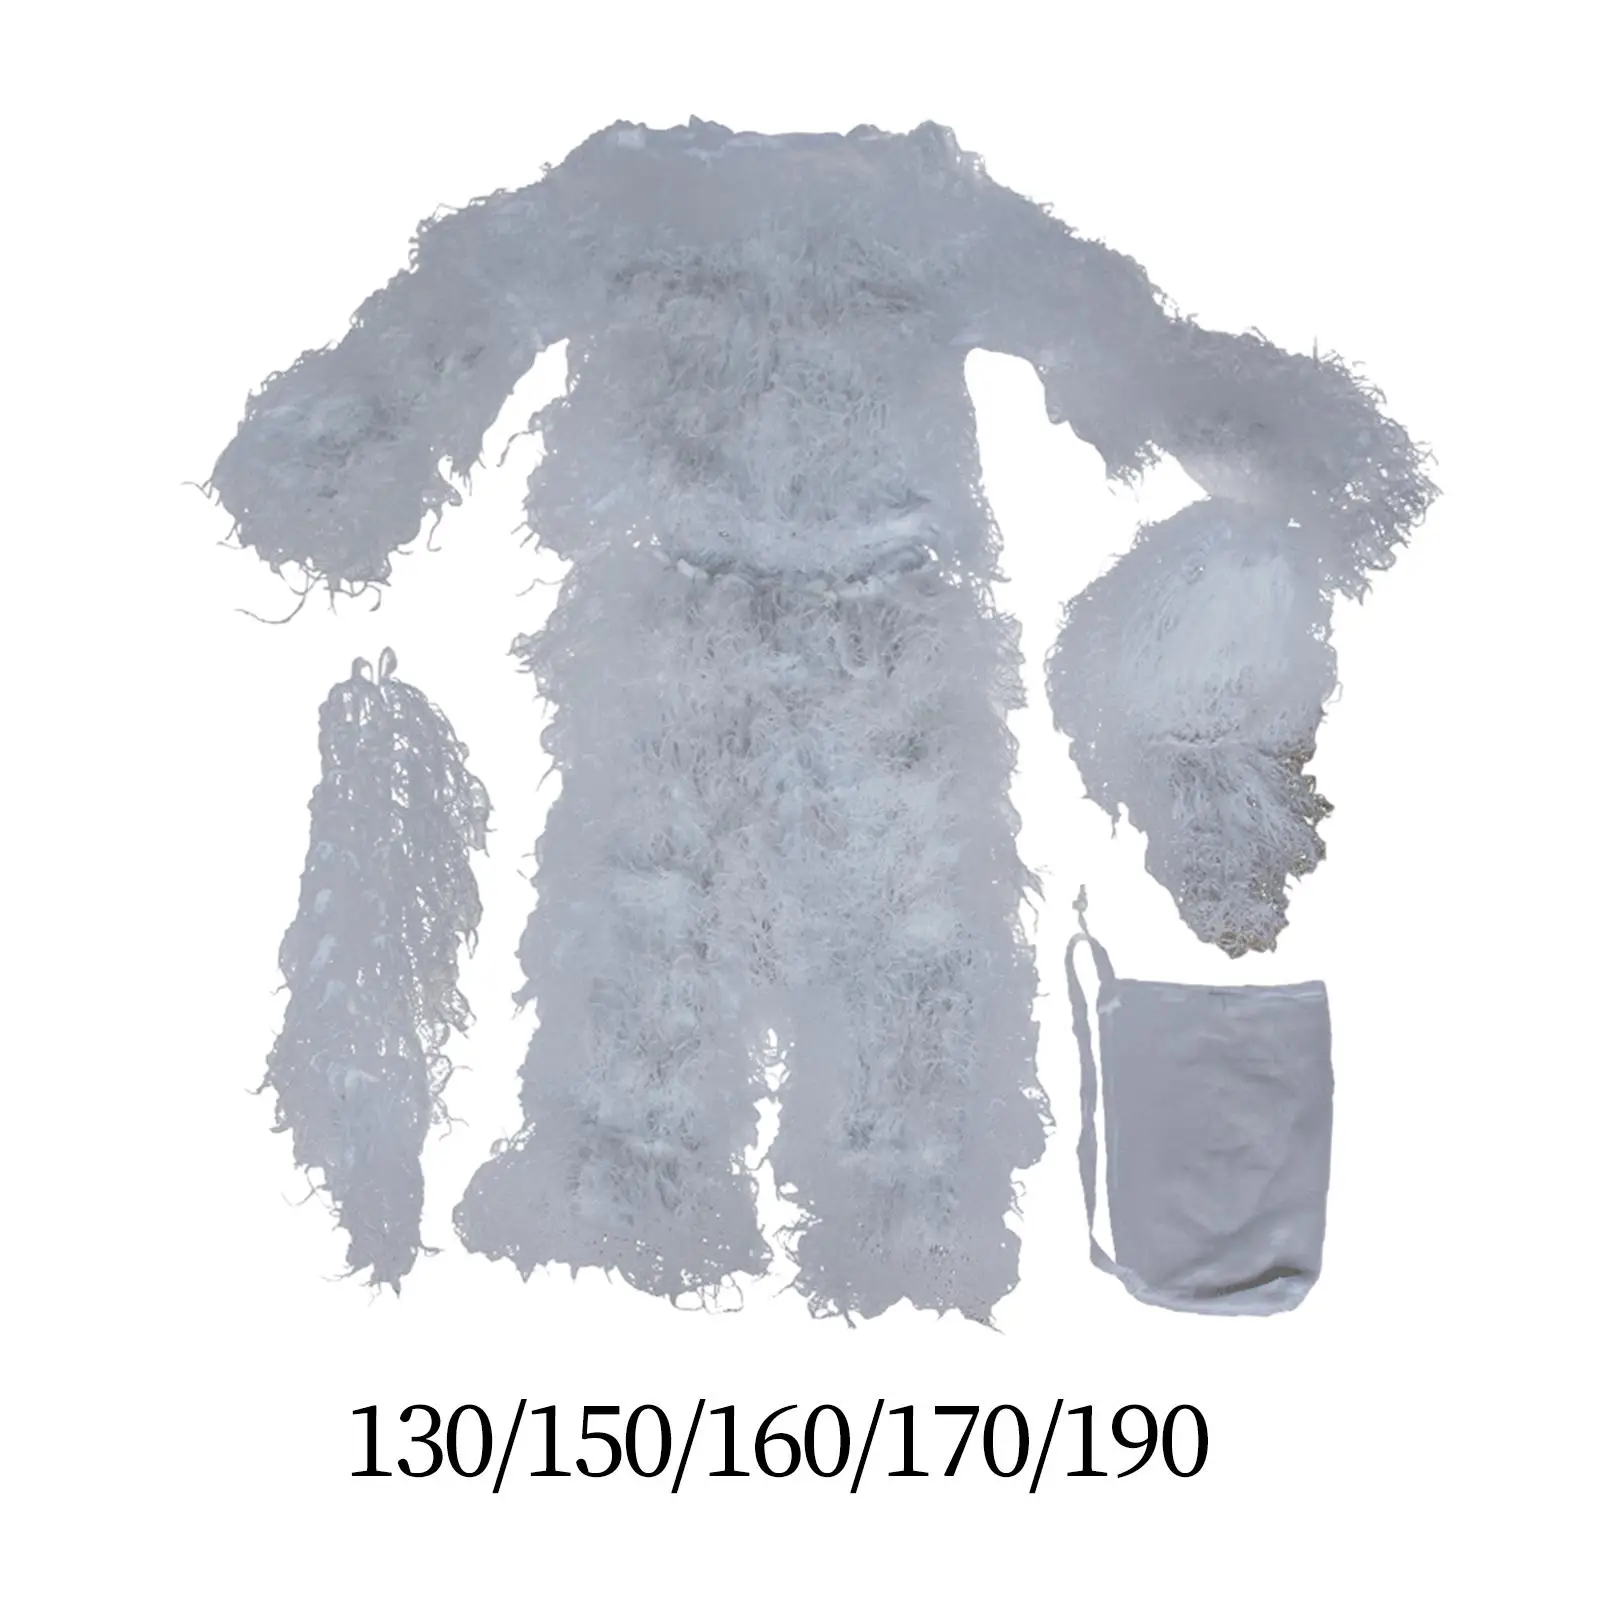 Ghillie Suit Breathable Gilly Suit Clothes Apparel for Snowfield Turkey Hunting Halloween Outdoor Game in Winter